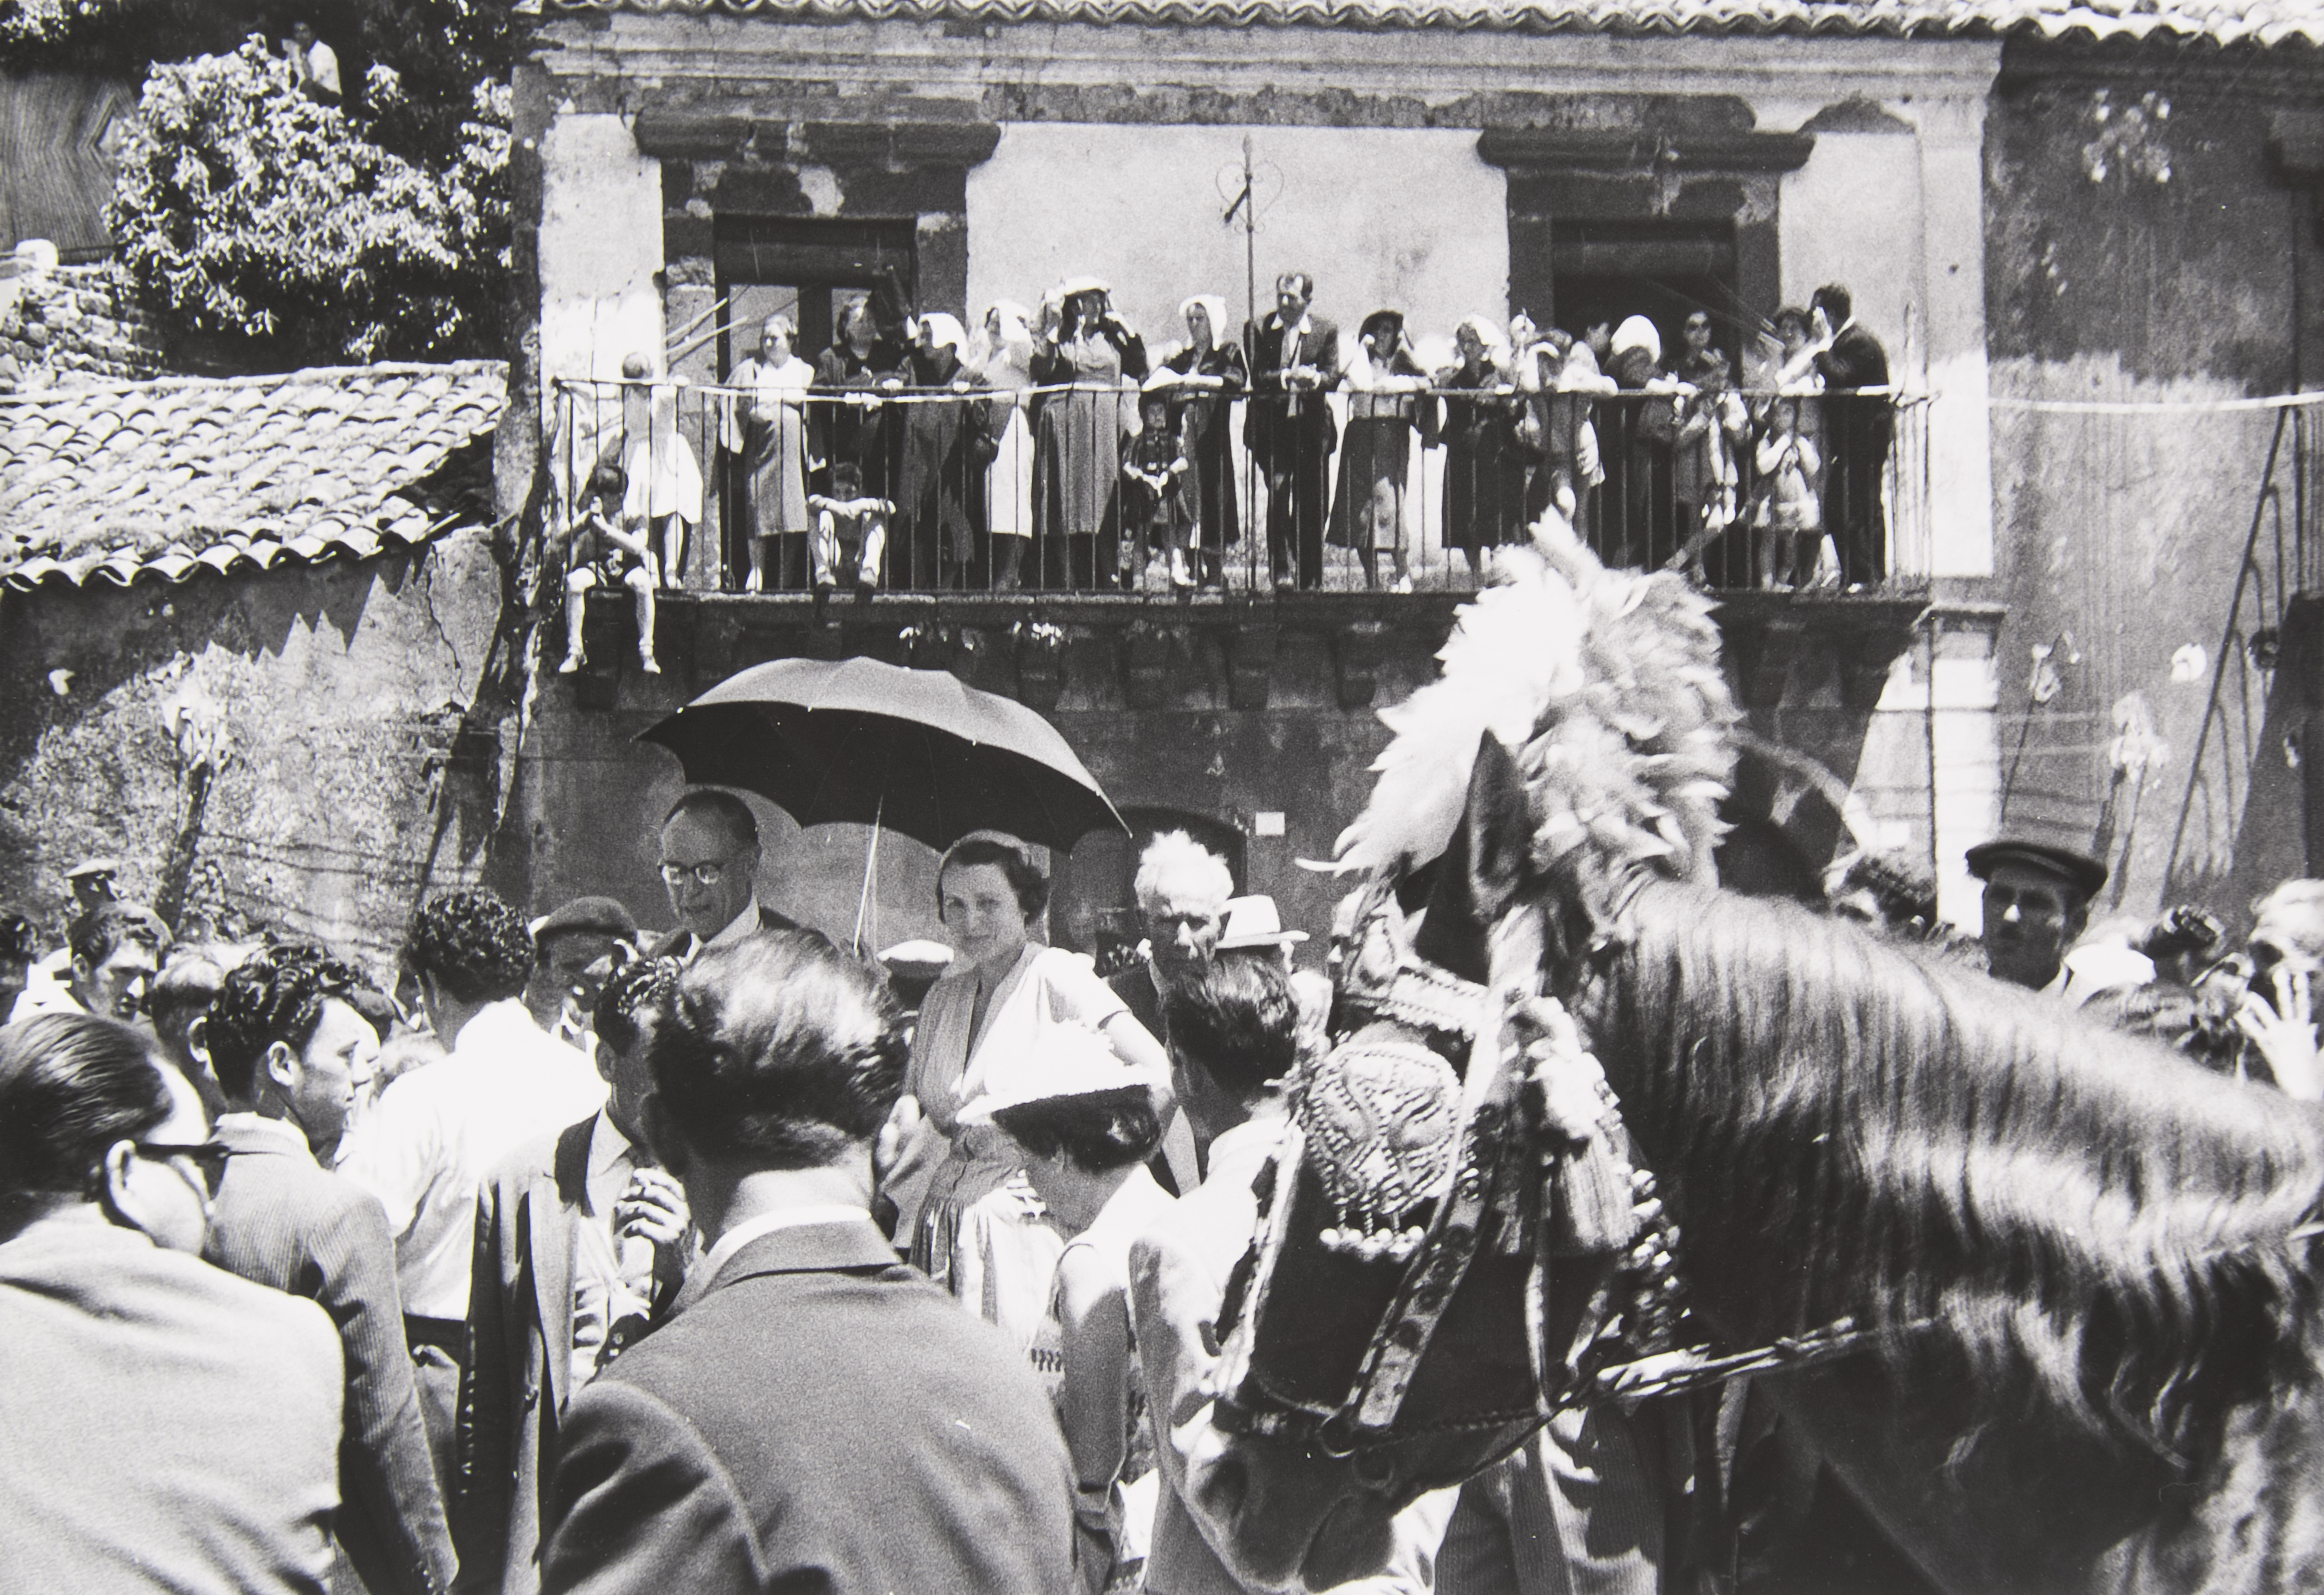 Group on balcony overlooking crowd of people, horse with feathers